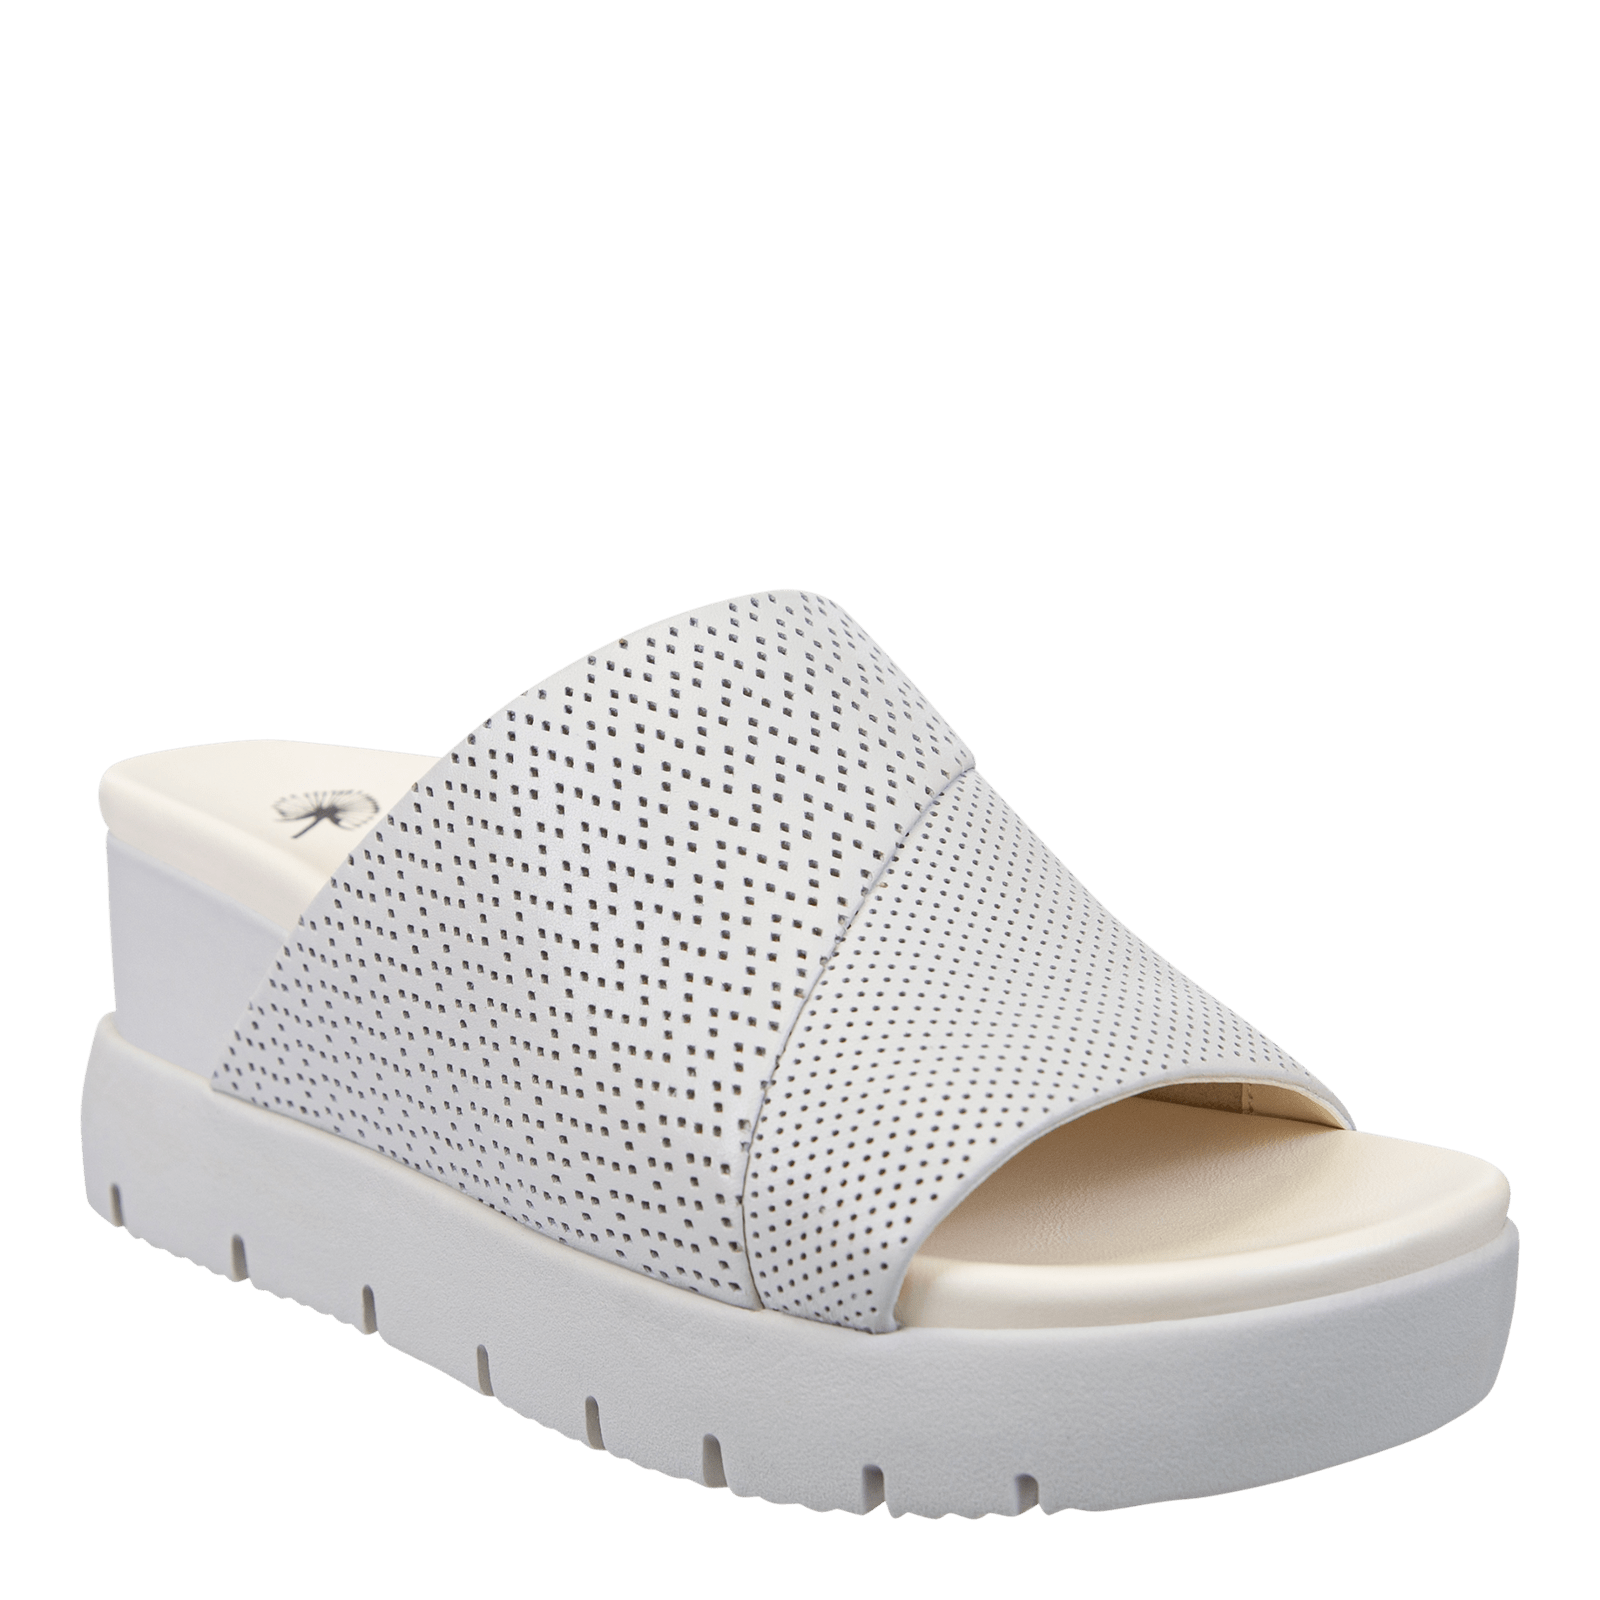 NORM in WHITE Wedge Sandals